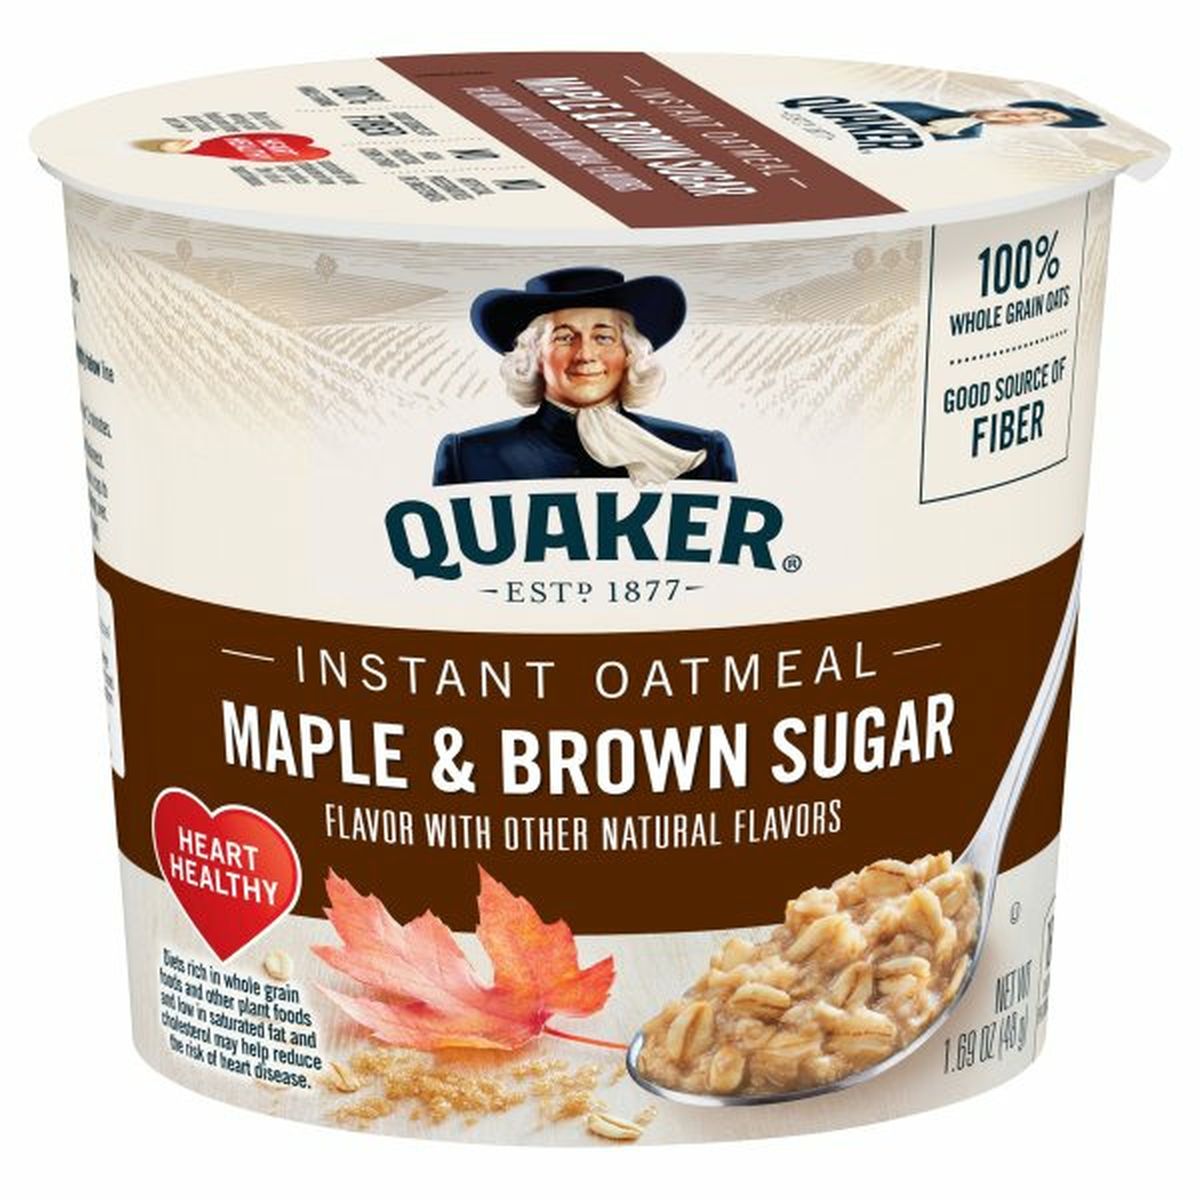 Calories in Quaker Instant Oatmeal Instant Oats Hot Cereal, Maple Brown Sugar